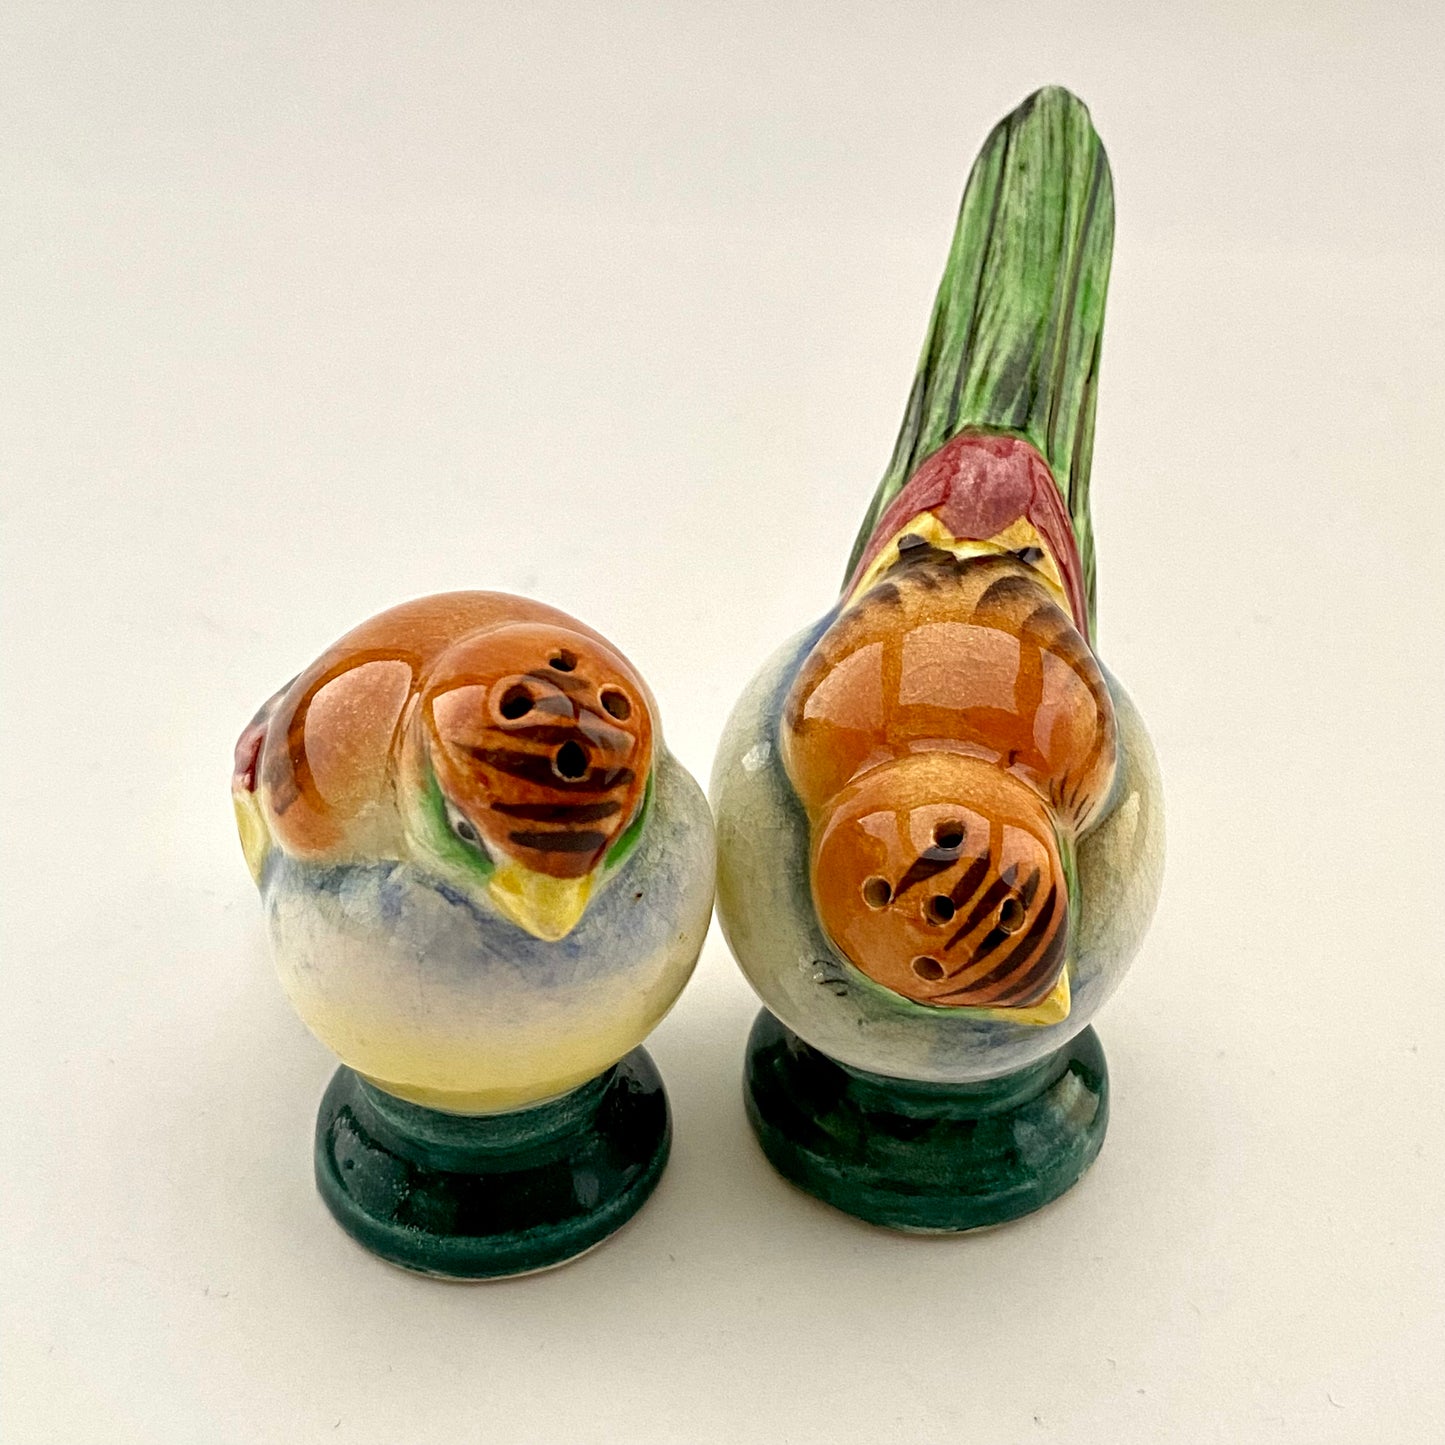 Late 50s/ Early 60s Japan Salt & Pepper Shakers